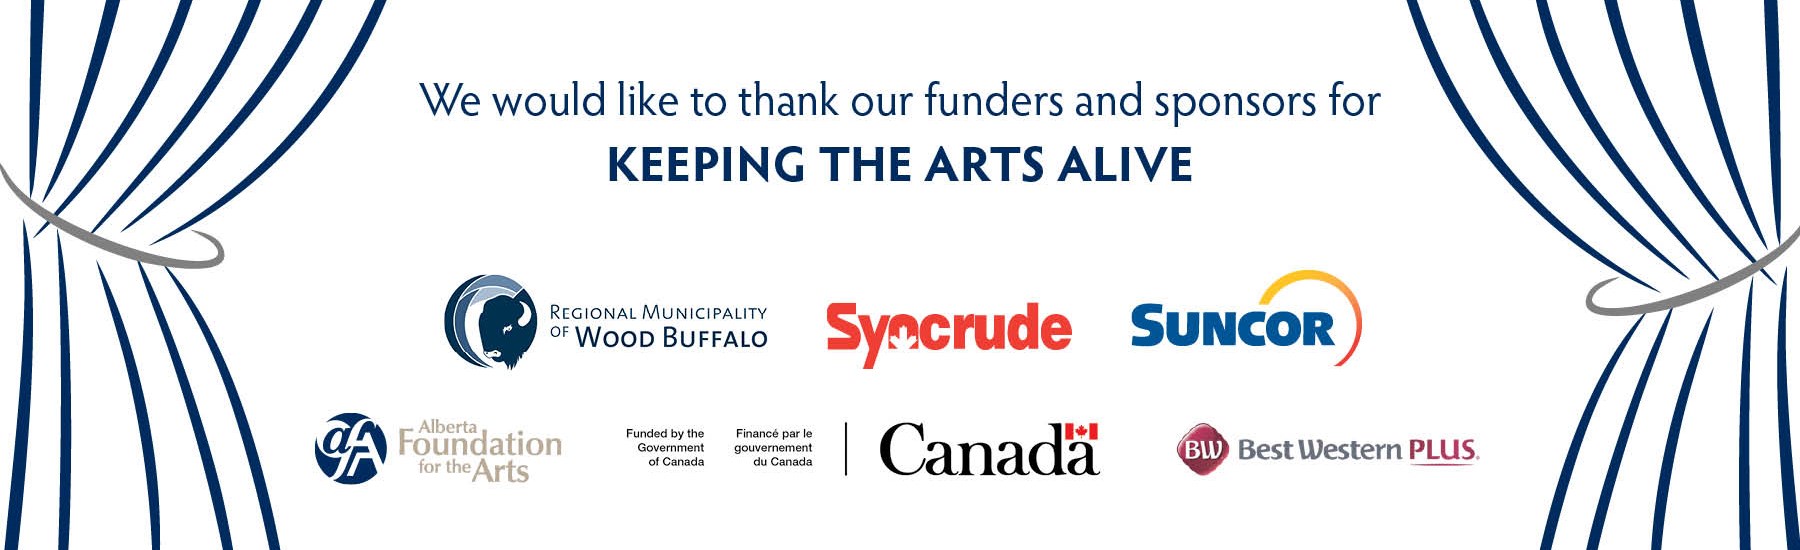 We would like to thank our sponsors for keeping the arts alive. Banner includes logos for the regional municipality of wood buffalo, Syncrude, Suncor, The government of Canada, Alberta foundation for the arts, and best western